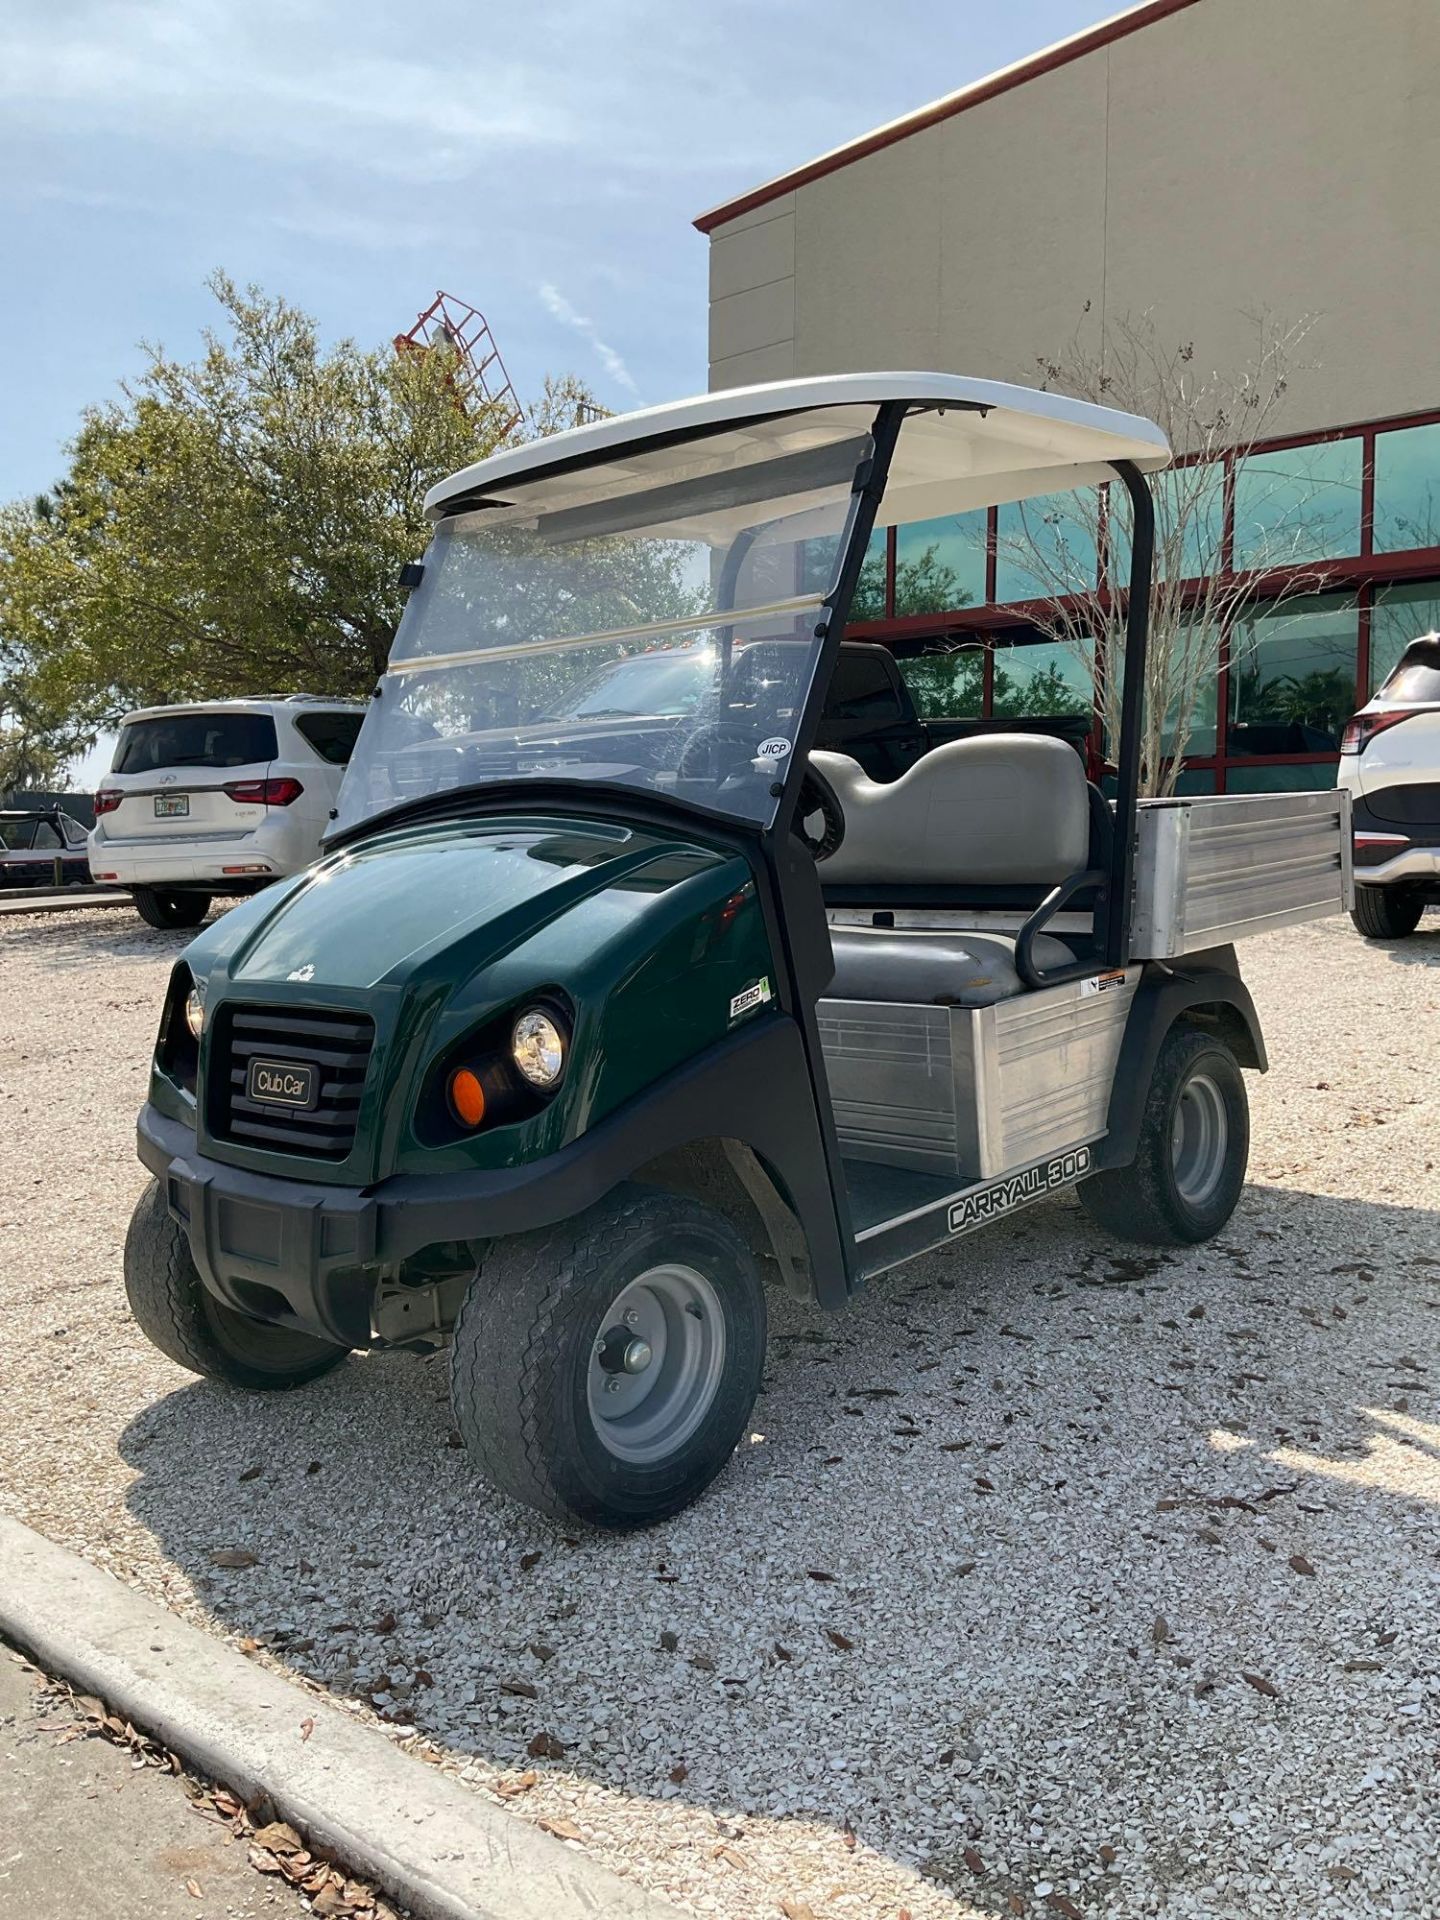 2018 CLUB CAR CARRYALL 300 ATV MODEL CA300 , ELECTRIC , MANUEL DUMP BED, BATTERY CHARGER INCLUDED... - Image 8 of 13